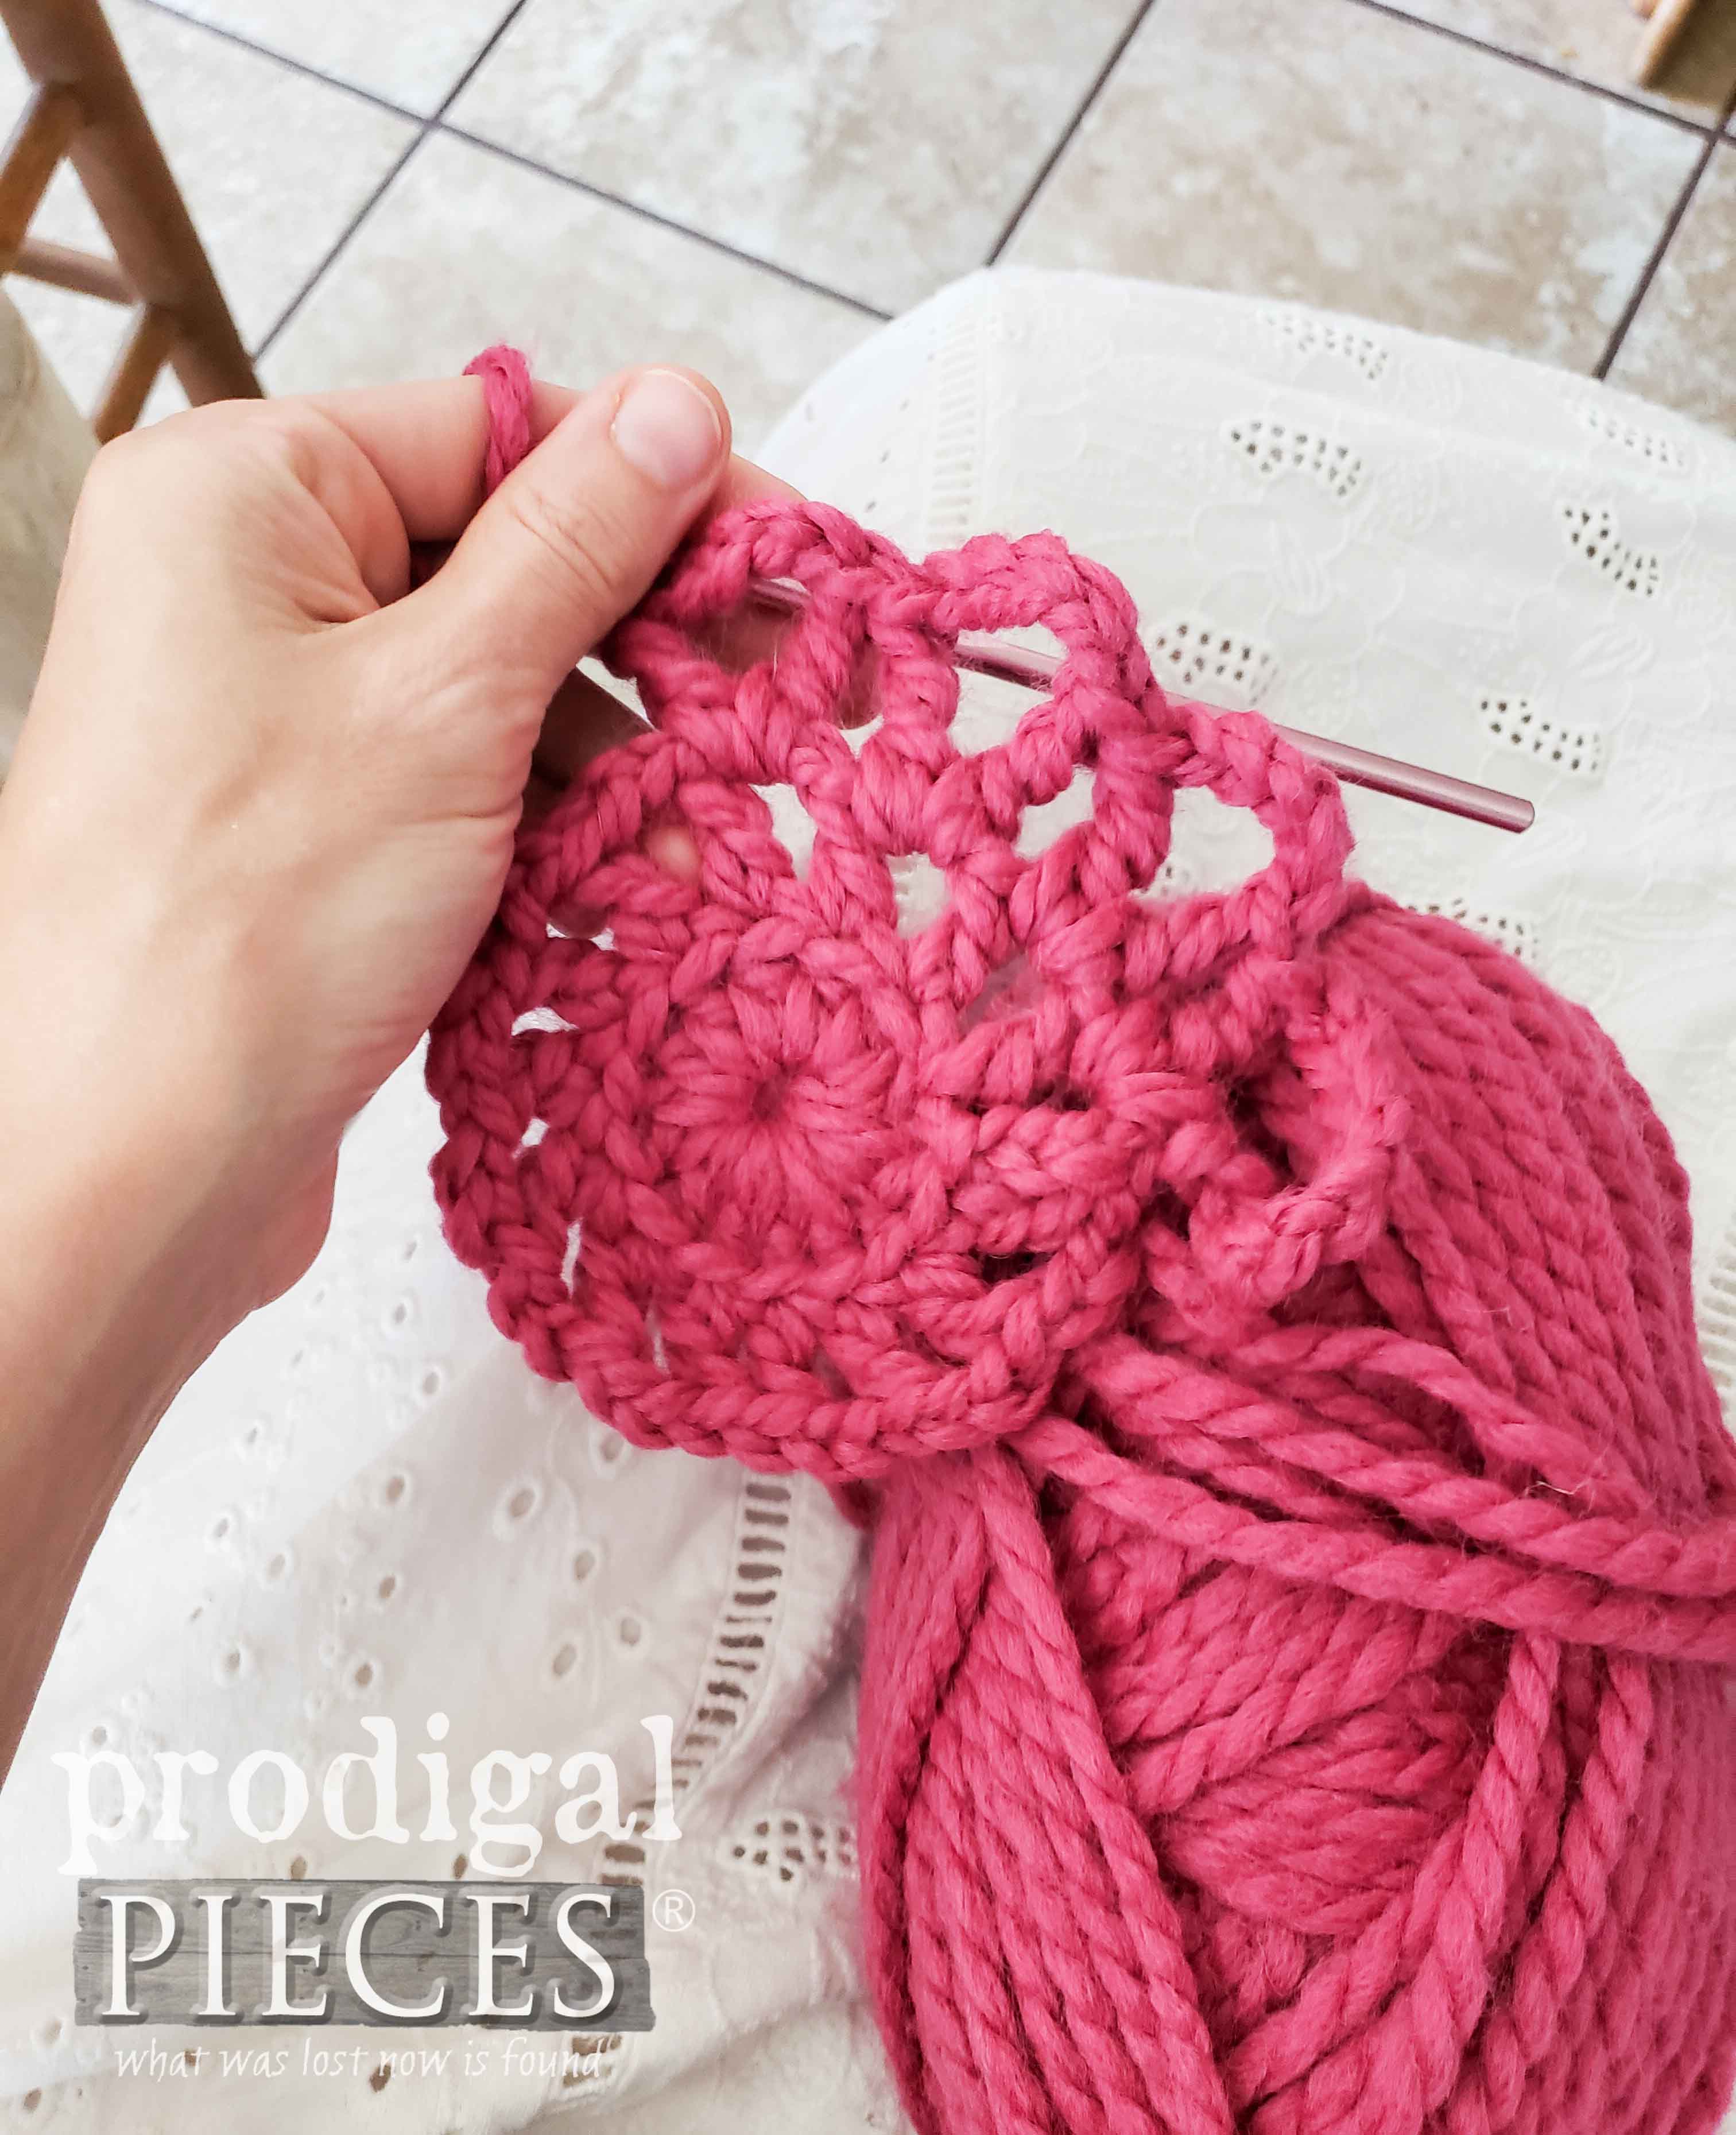 Crocheting Wool Stool Cover in Fuscia by Larissa of Prodigal Pieces | prodigalpieces.com #prodigalpieces #diy #crochet #furniture #home #homedecor